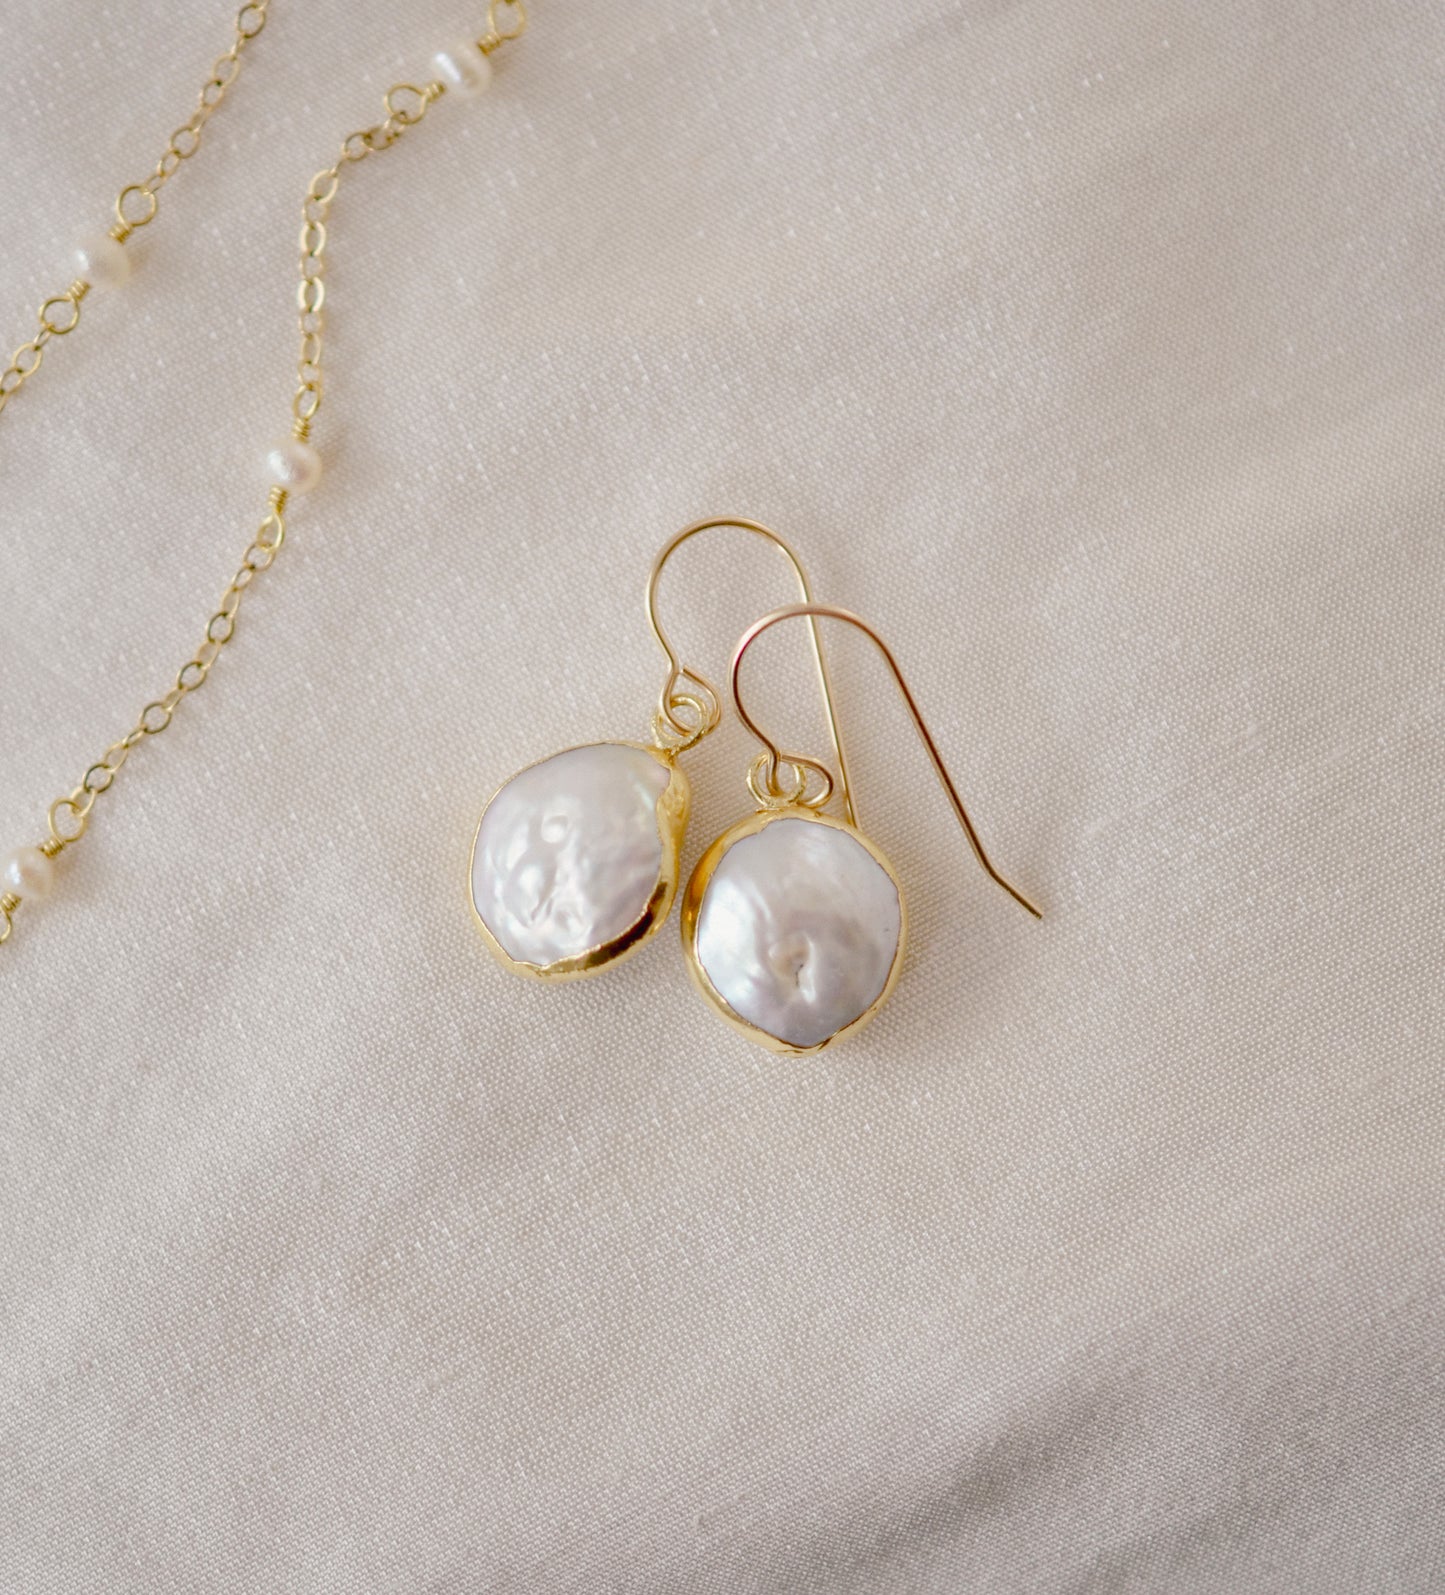 Natural white freshwater pearl dangle earring. The pearl is set in 22k gold electroplate and suspended from 14k gold filled earring hooks.